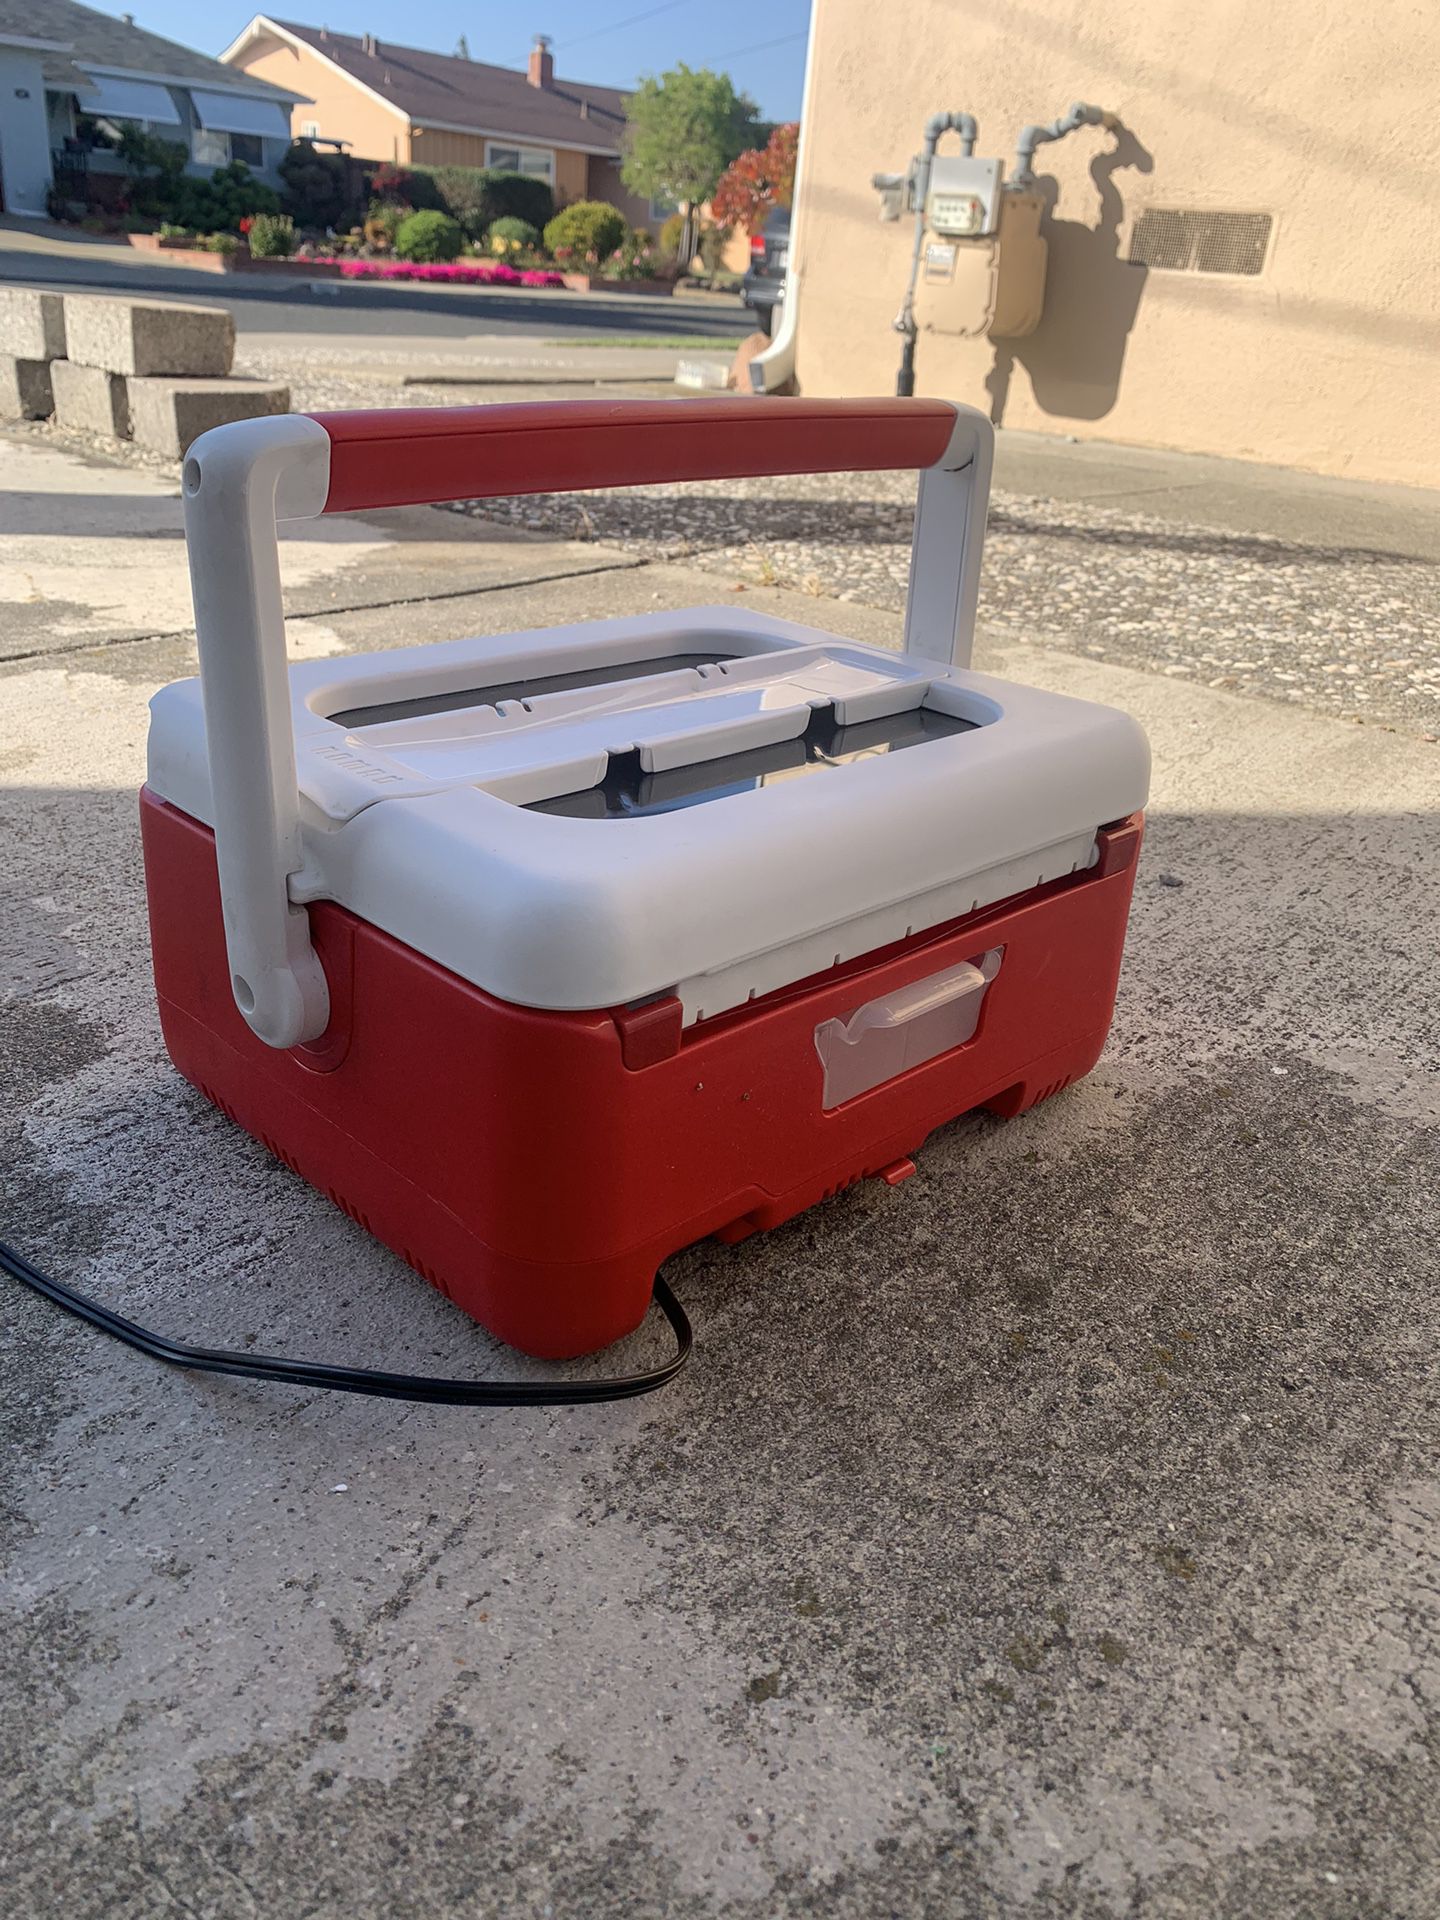 Portable Slow Cooker for Sale in San Lorenzo, CA - OfferUp